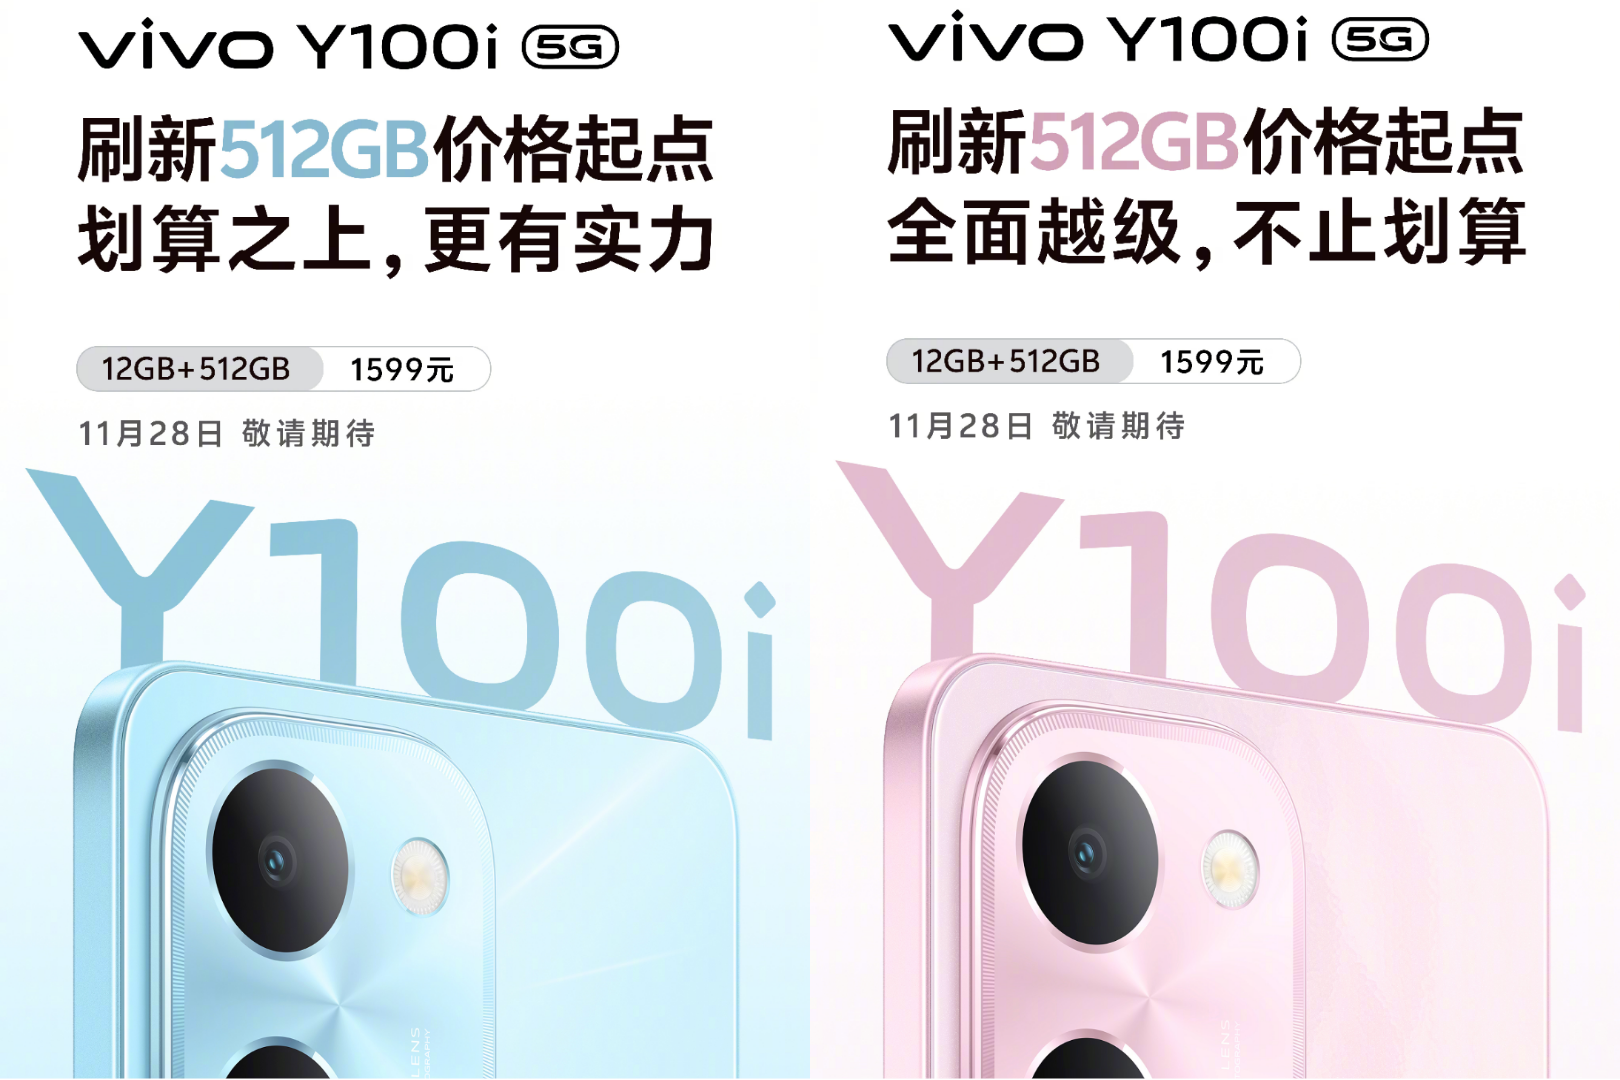 Vivo Y100i 5G with 12GB RAM, 512GB ROM teased to Launch in China